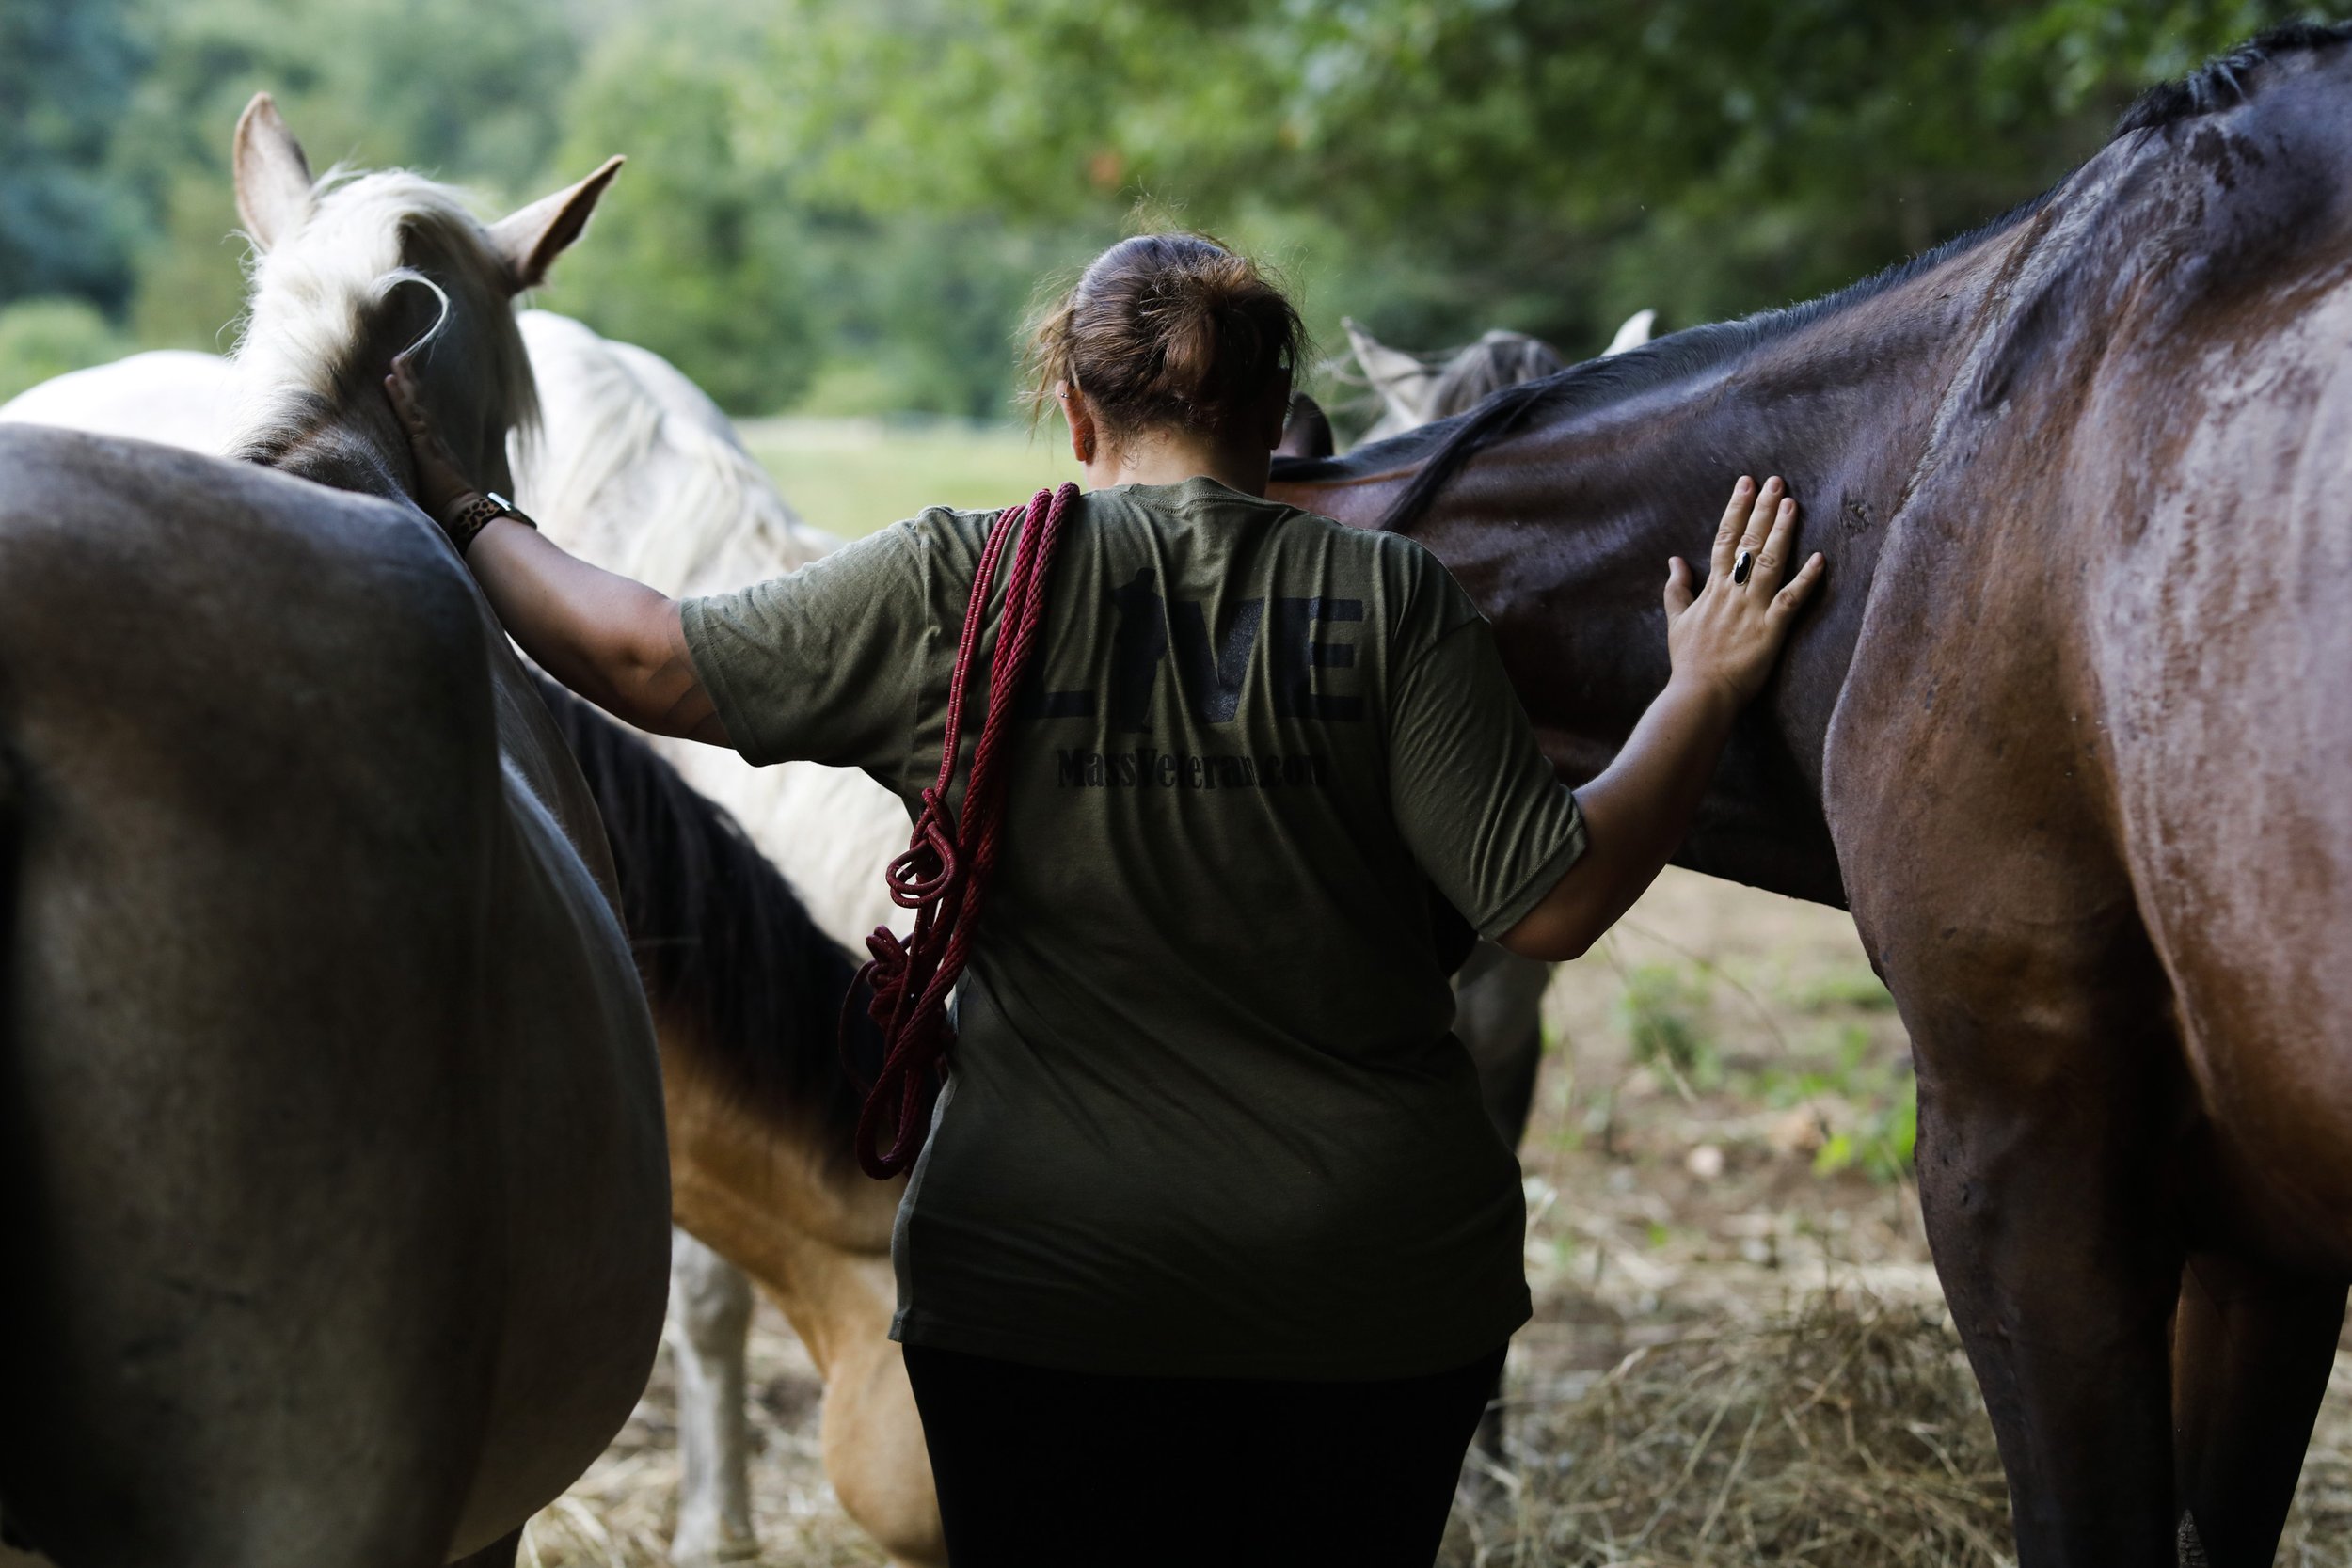  US Navy veteran Lauren DePina approaches horses with a halter over her shoulder to begin working on equine rehabilitation techniques at Project ComeBack in Holliston, Mass. on July 28, 2022. "People don't understand us as veterans... It's like a fre